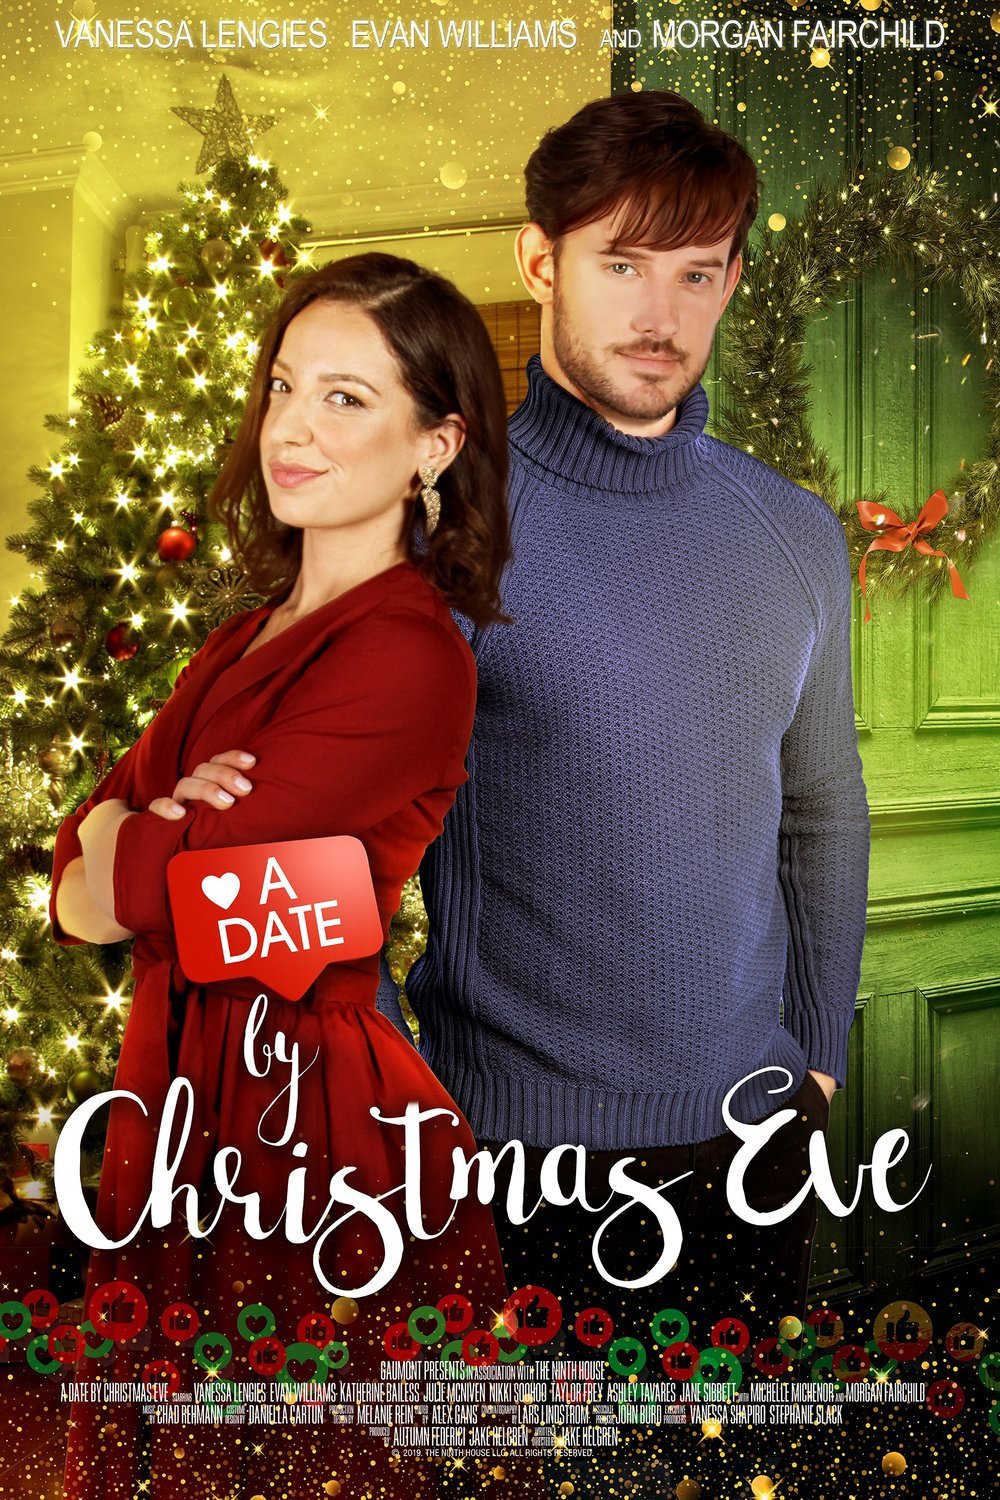 Poster of the movie A Date by Christmas Eve